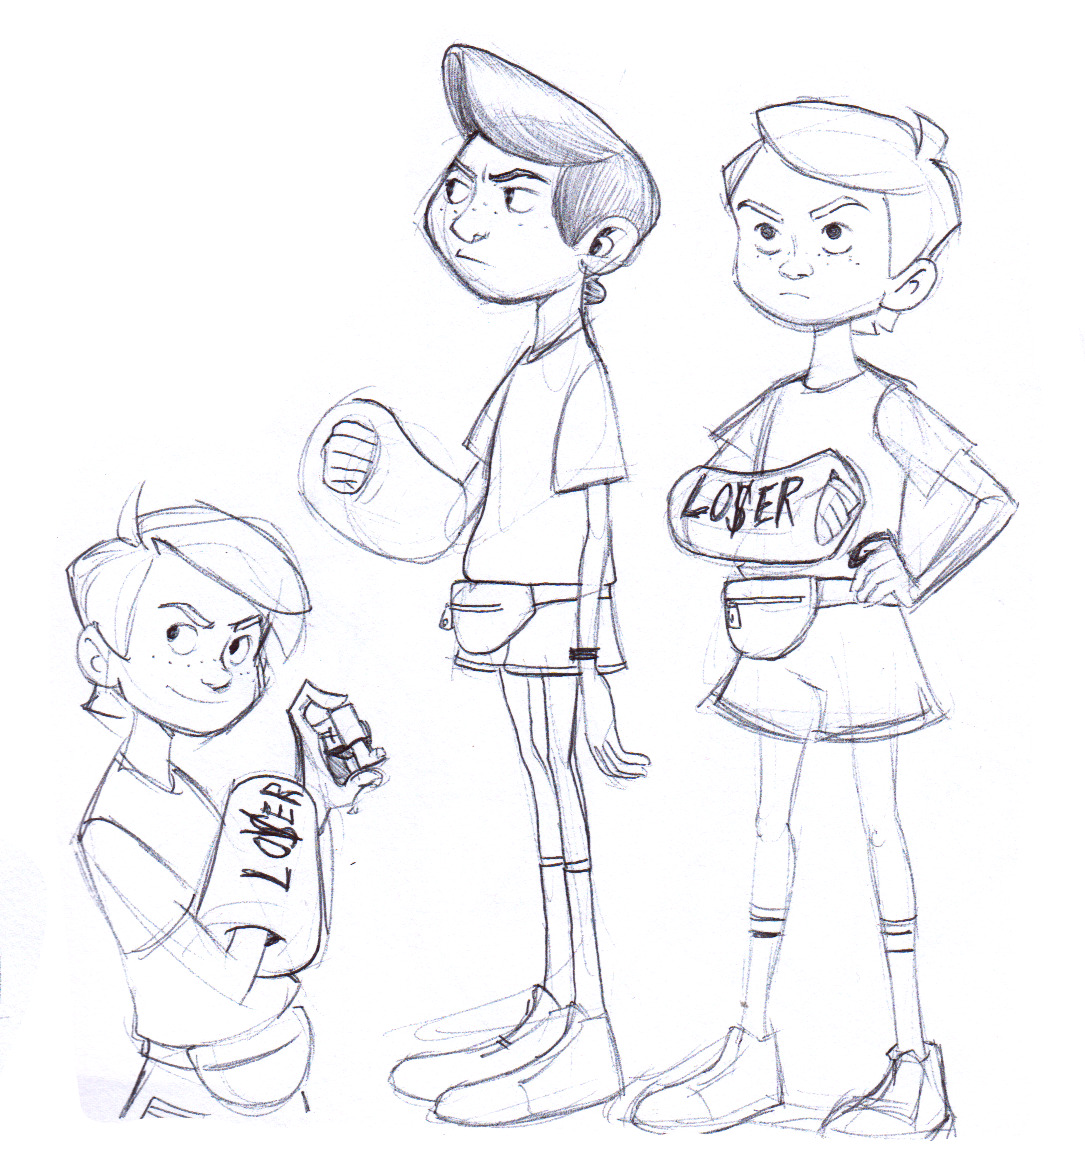 three-legged-cow: Some style studies with eddie and richie